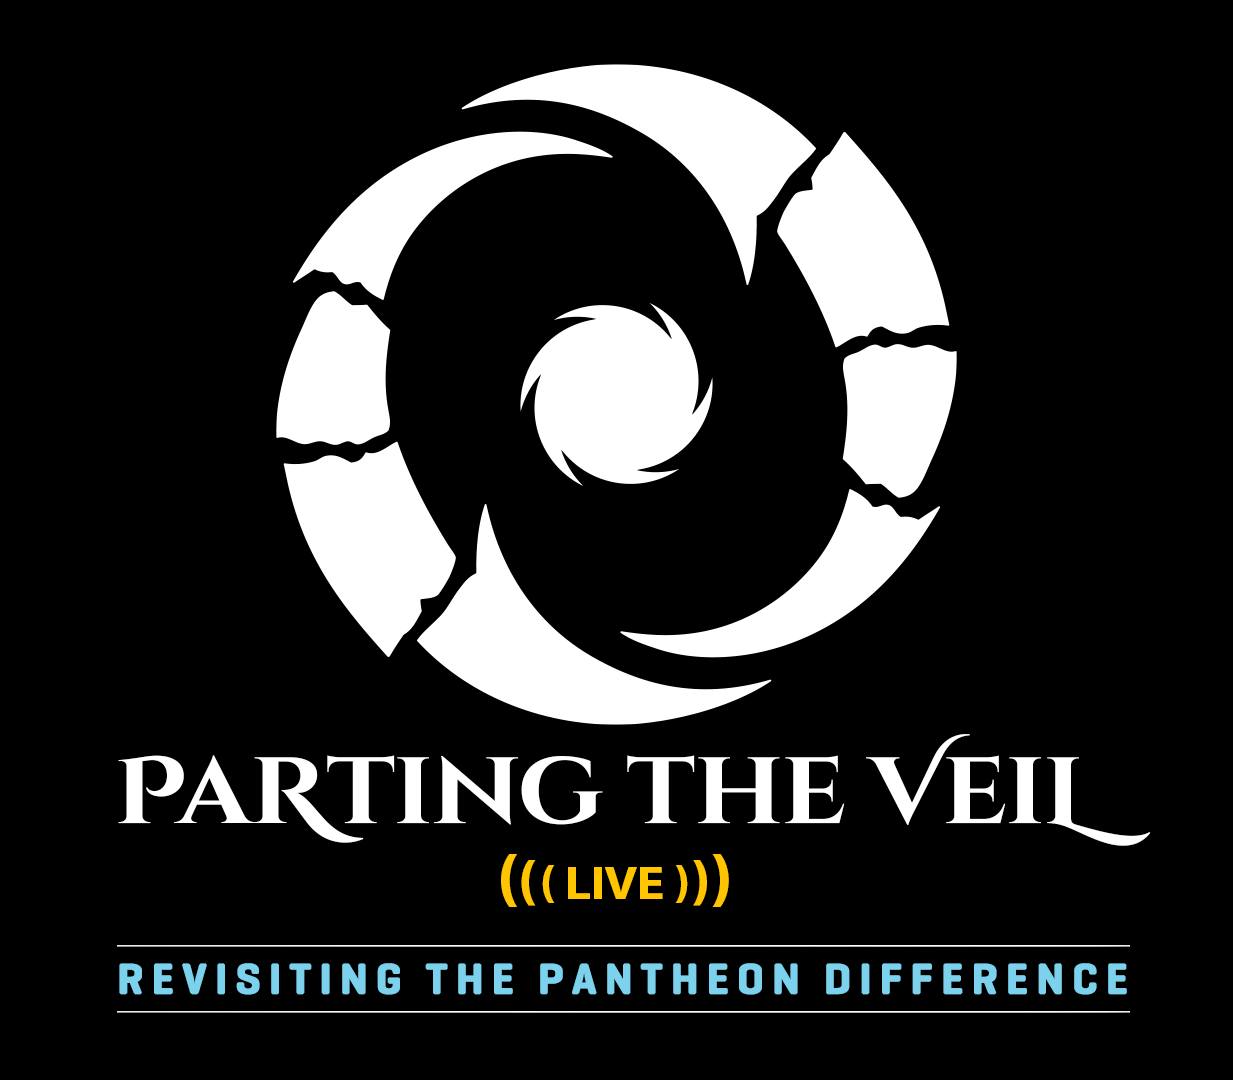 2022-Nov 4: promo for Parting the Veil show with modified Pantheon logo